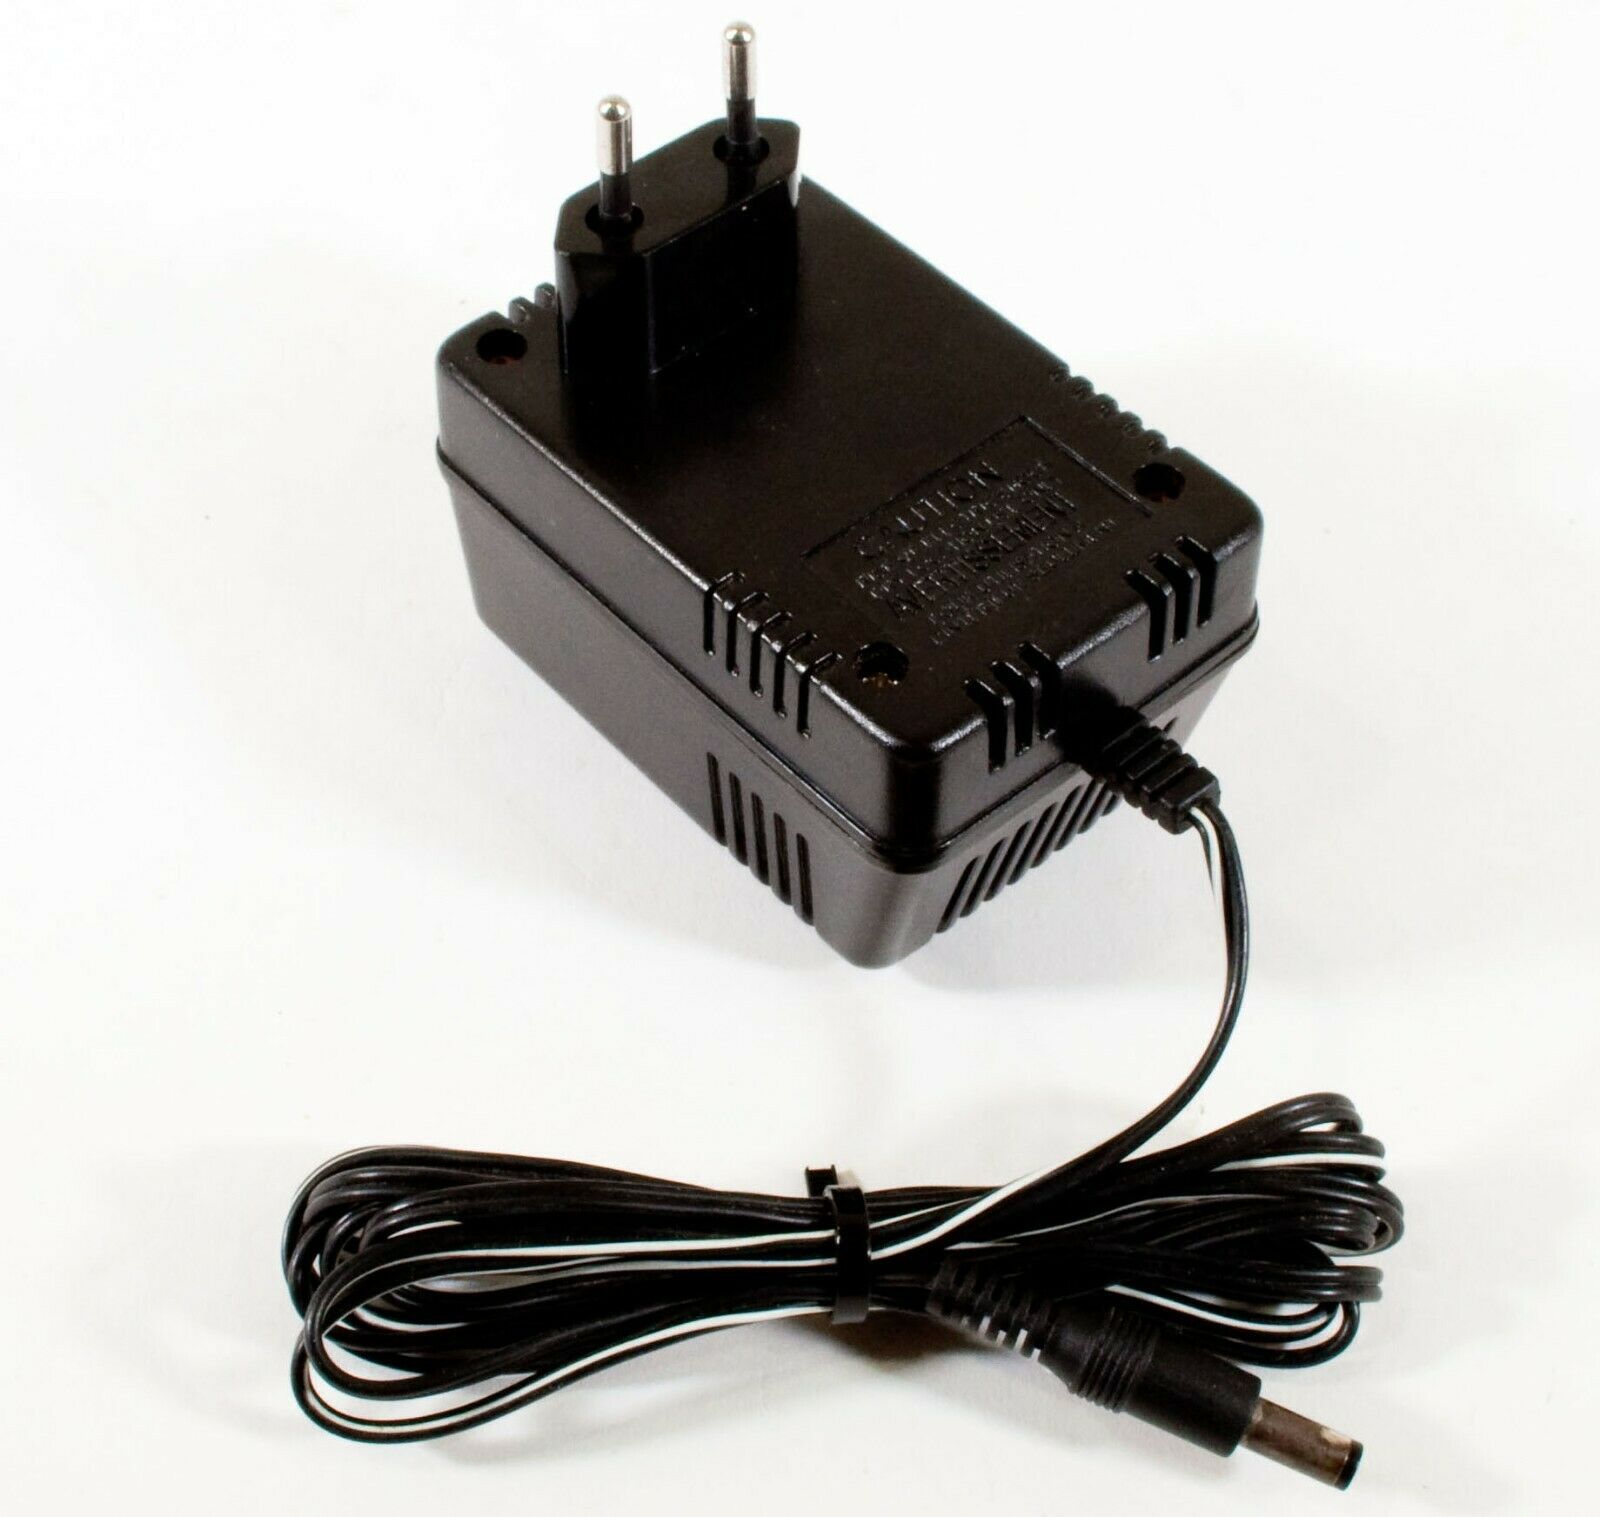 SY SY-09090-GS AC Adapter 9V 900mA Original Power Supply Charger Europlug Output Current: 900 mA MPN: SY-09090-GS - Click Image to Close